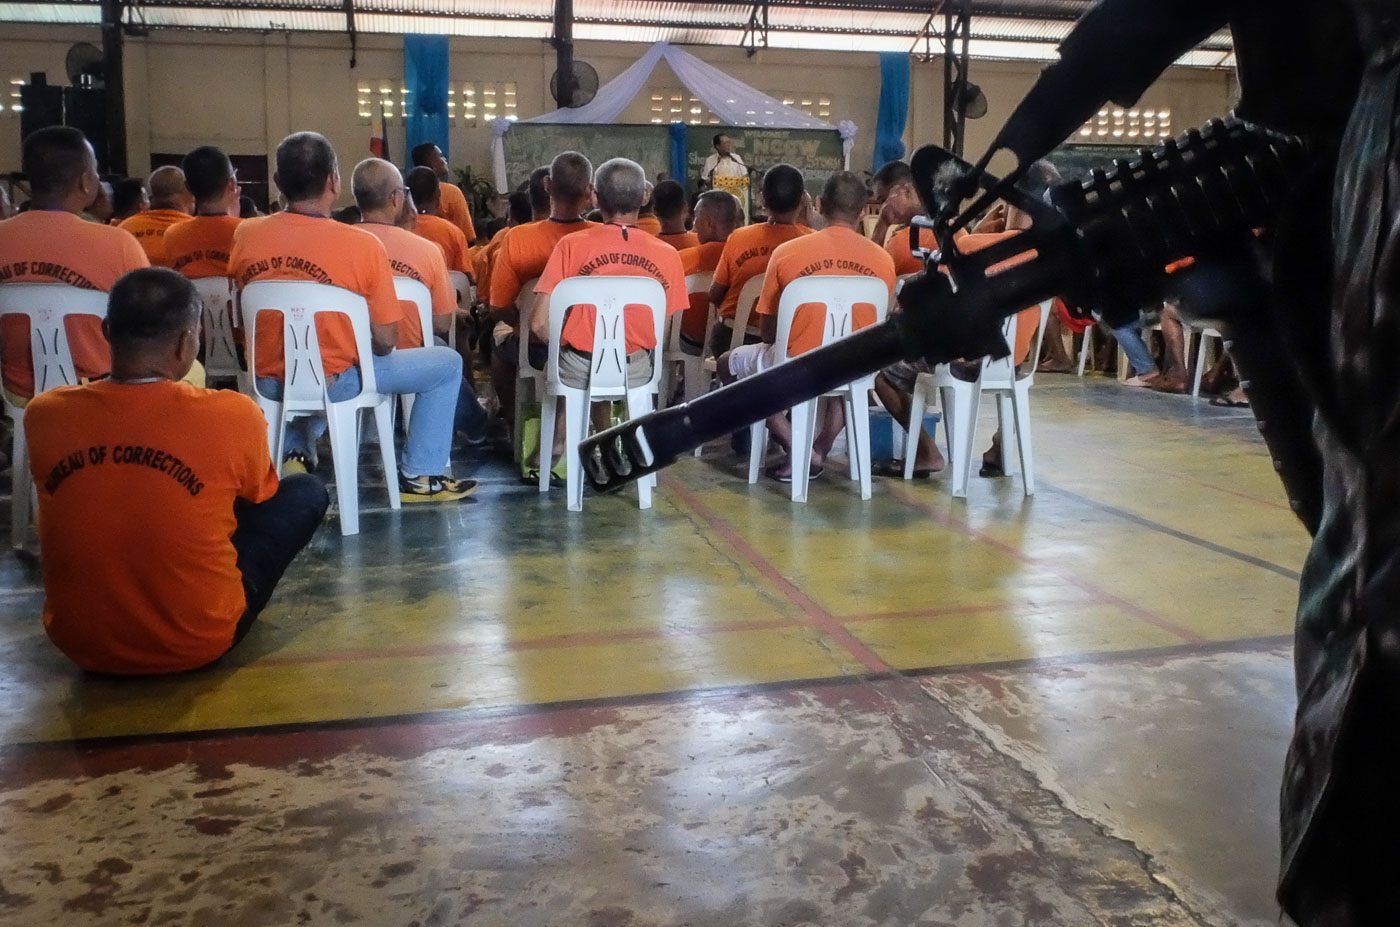 PNP: Releasing thousands of Bilibid inmates not cause for concern